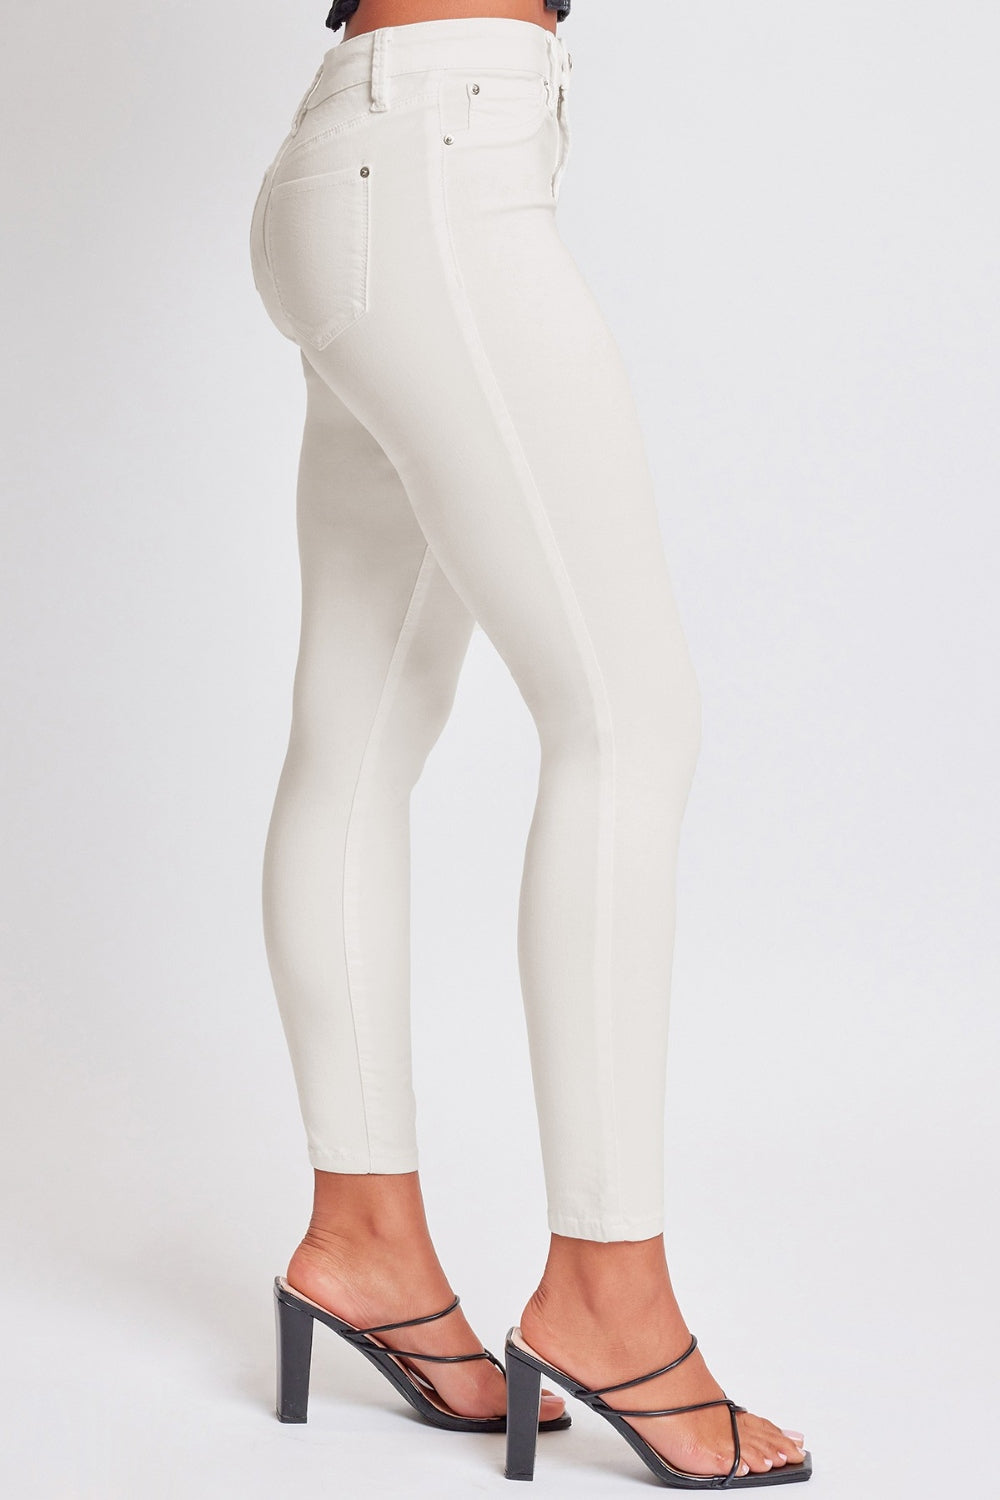 YMI Jeanswear Hyperstretch Mid-Rise Skinny Jeans-Pants-Inspired by Justeen-Women's Clothing Boutique in Chicago, Illinois